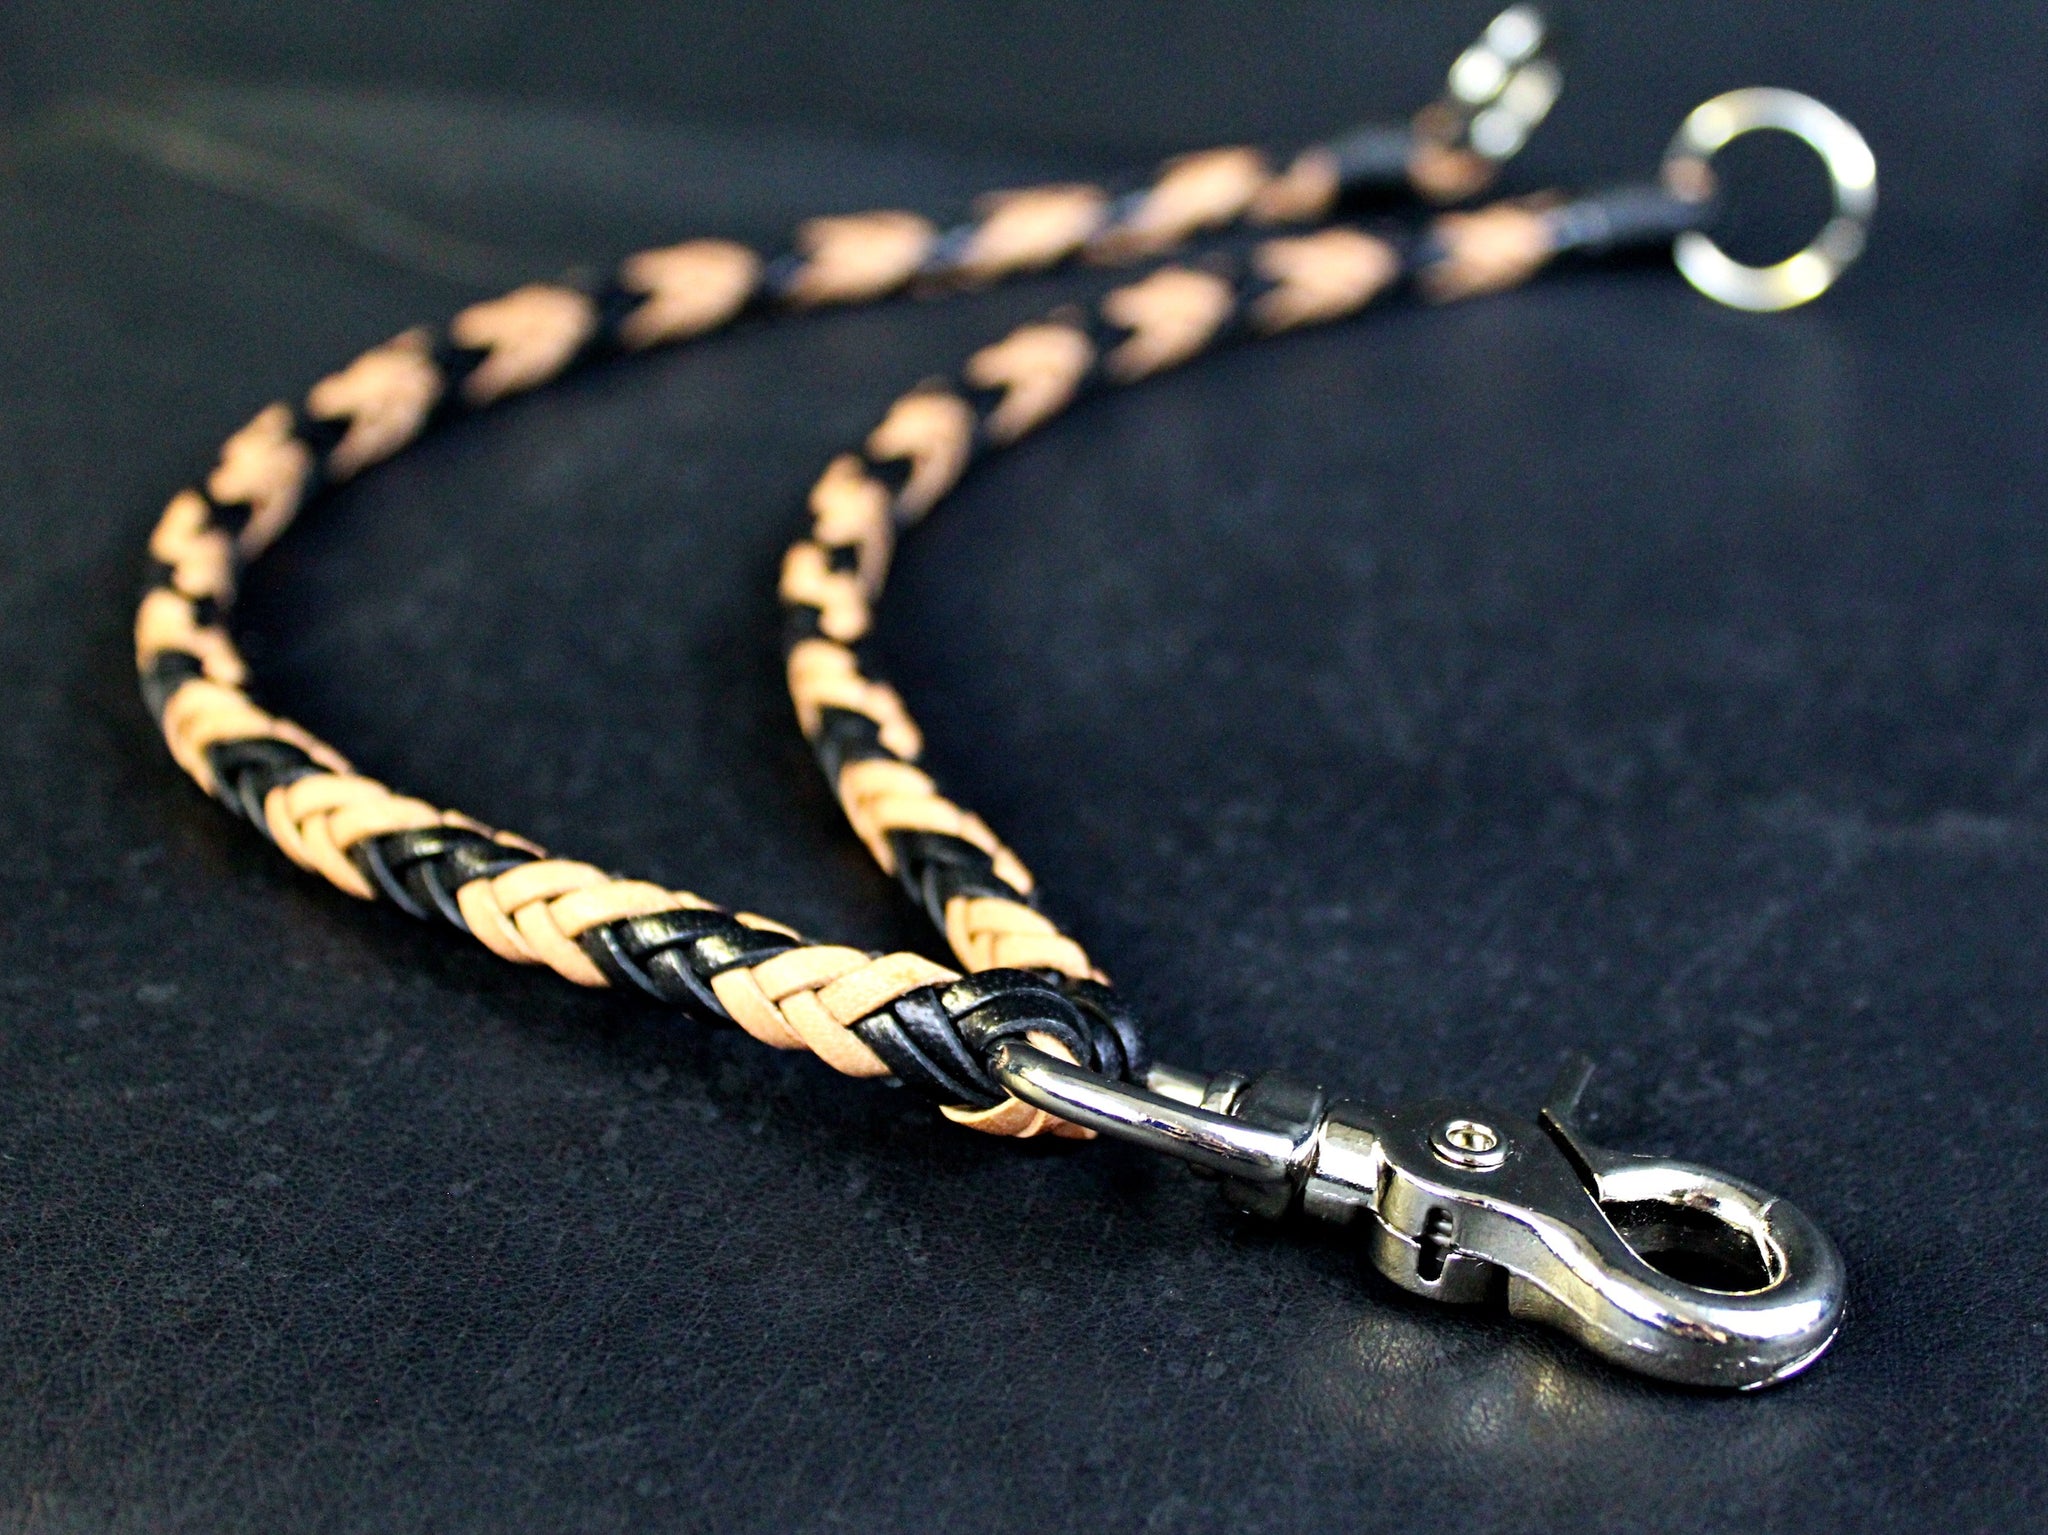 Mens double braided leather wallet chain two chains custom american made by san filippo leather